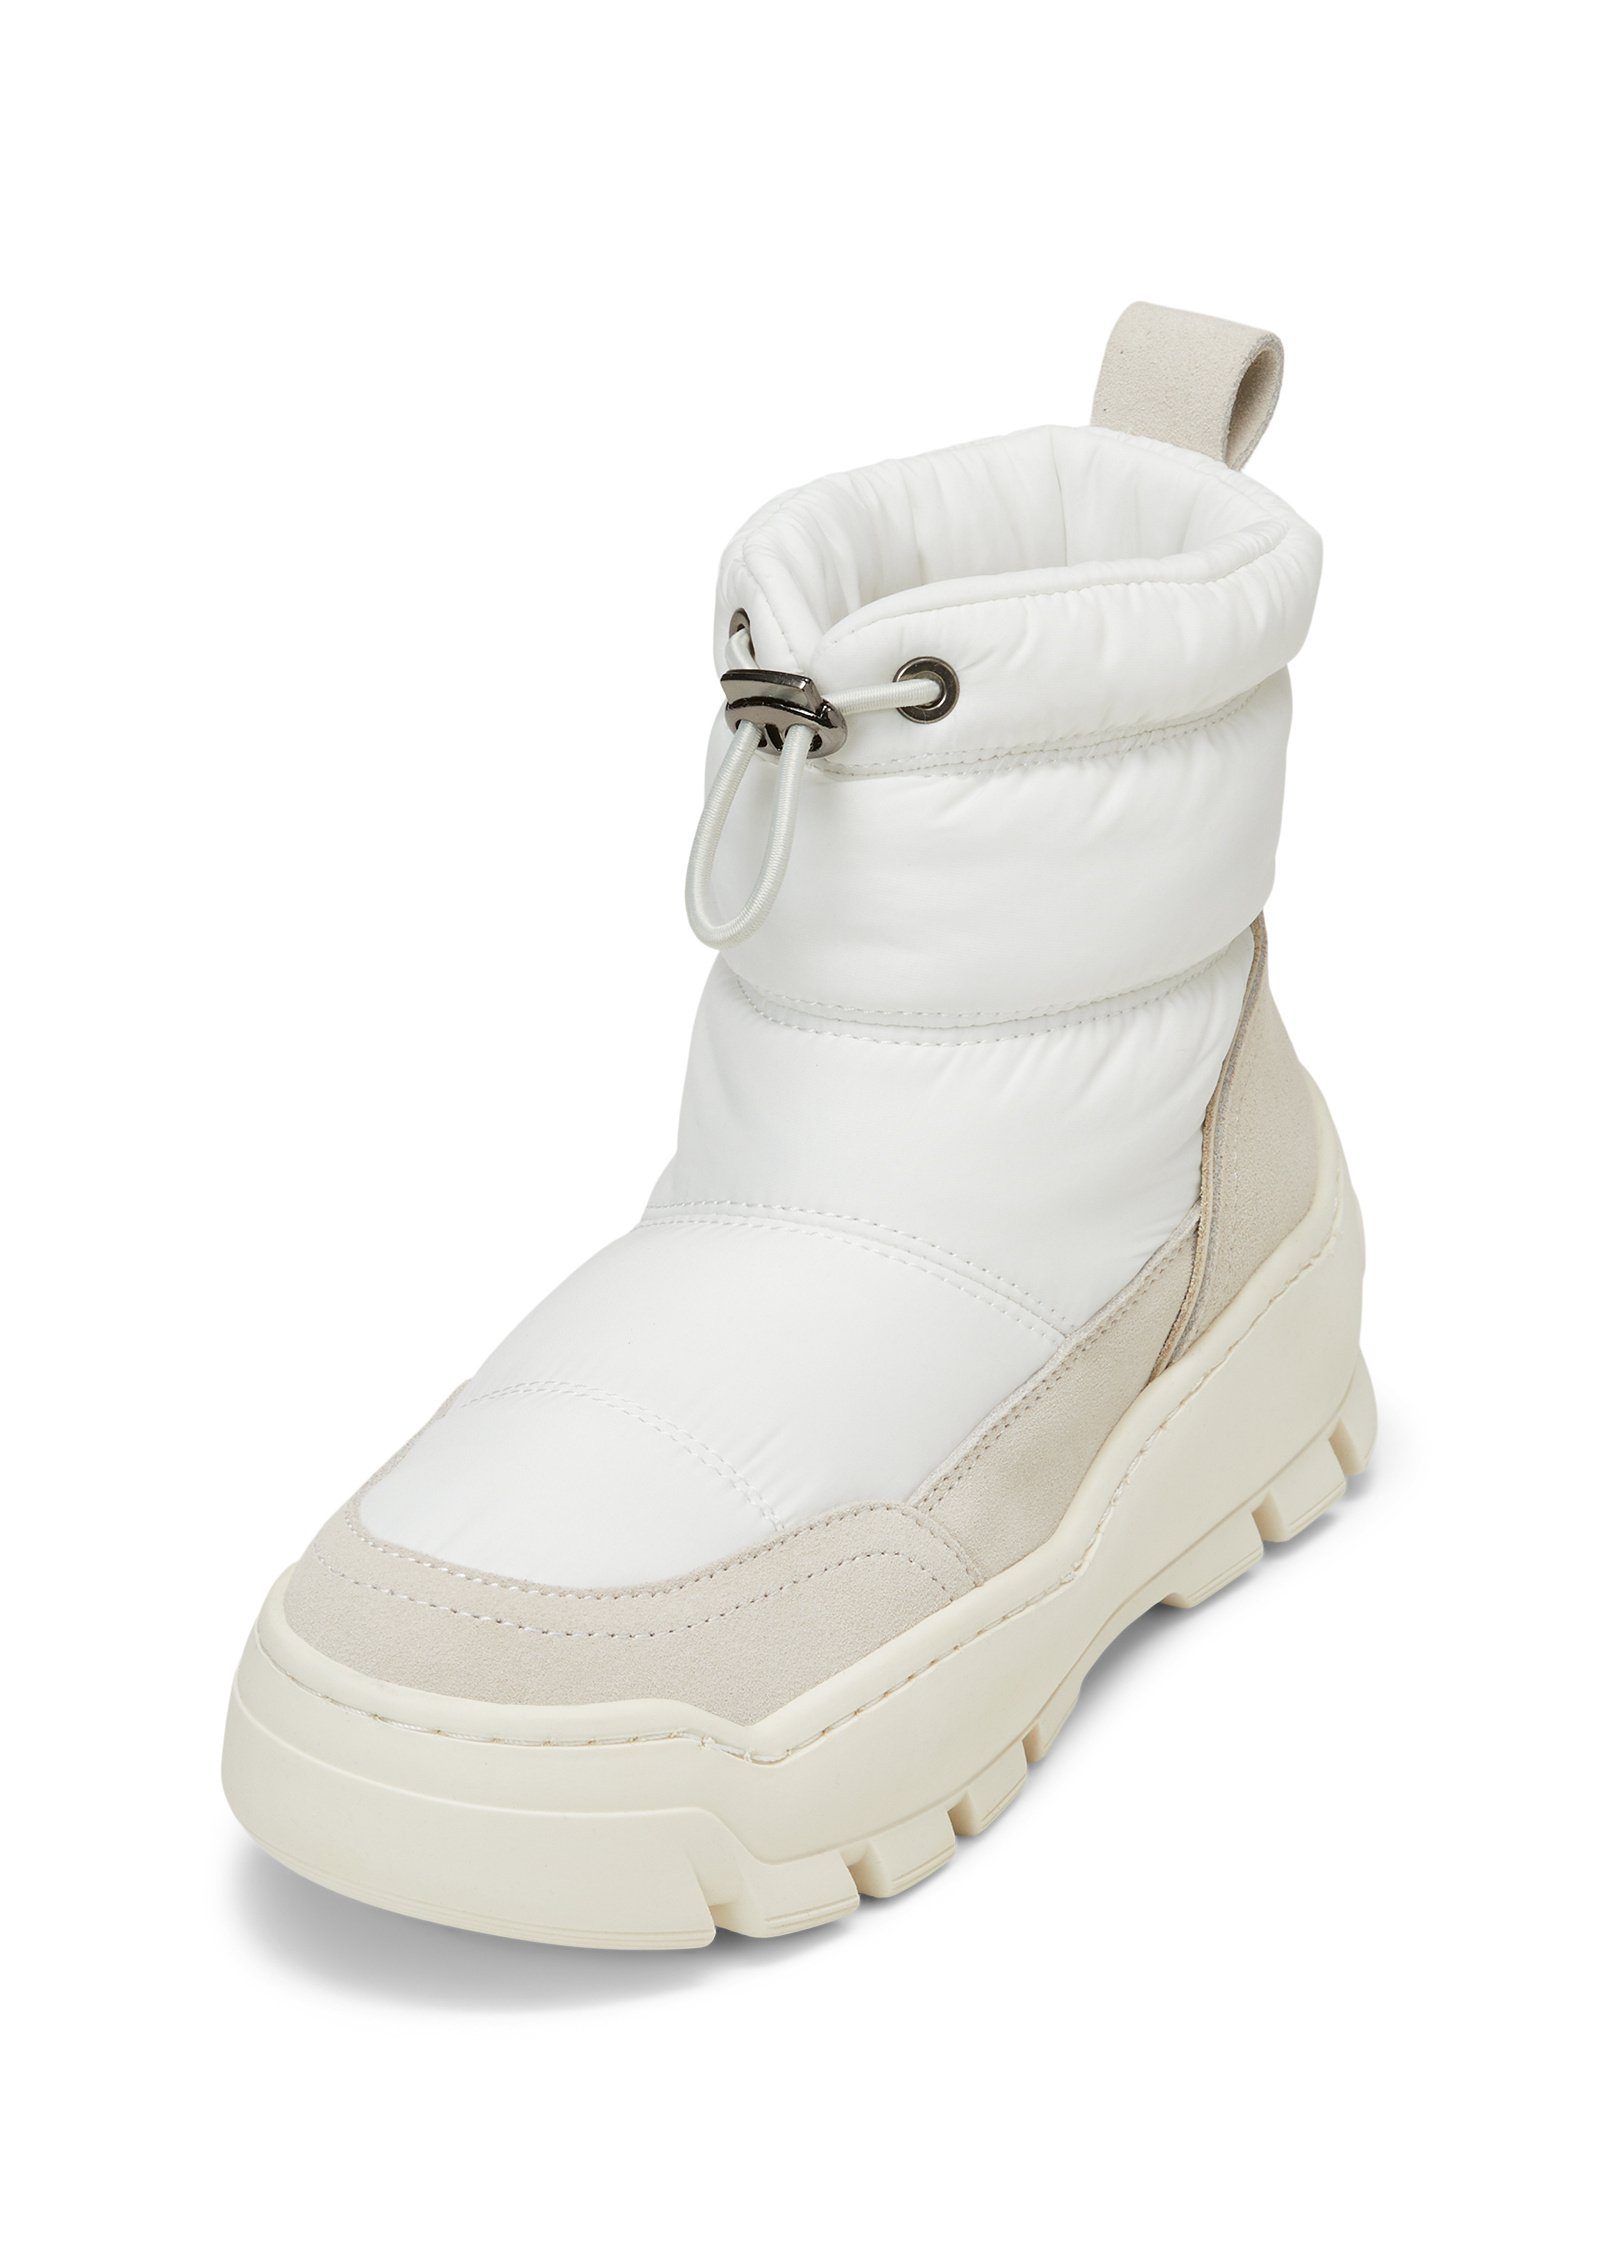 Marc O'Polo aus recyceltem Polyester Winterboots weiß